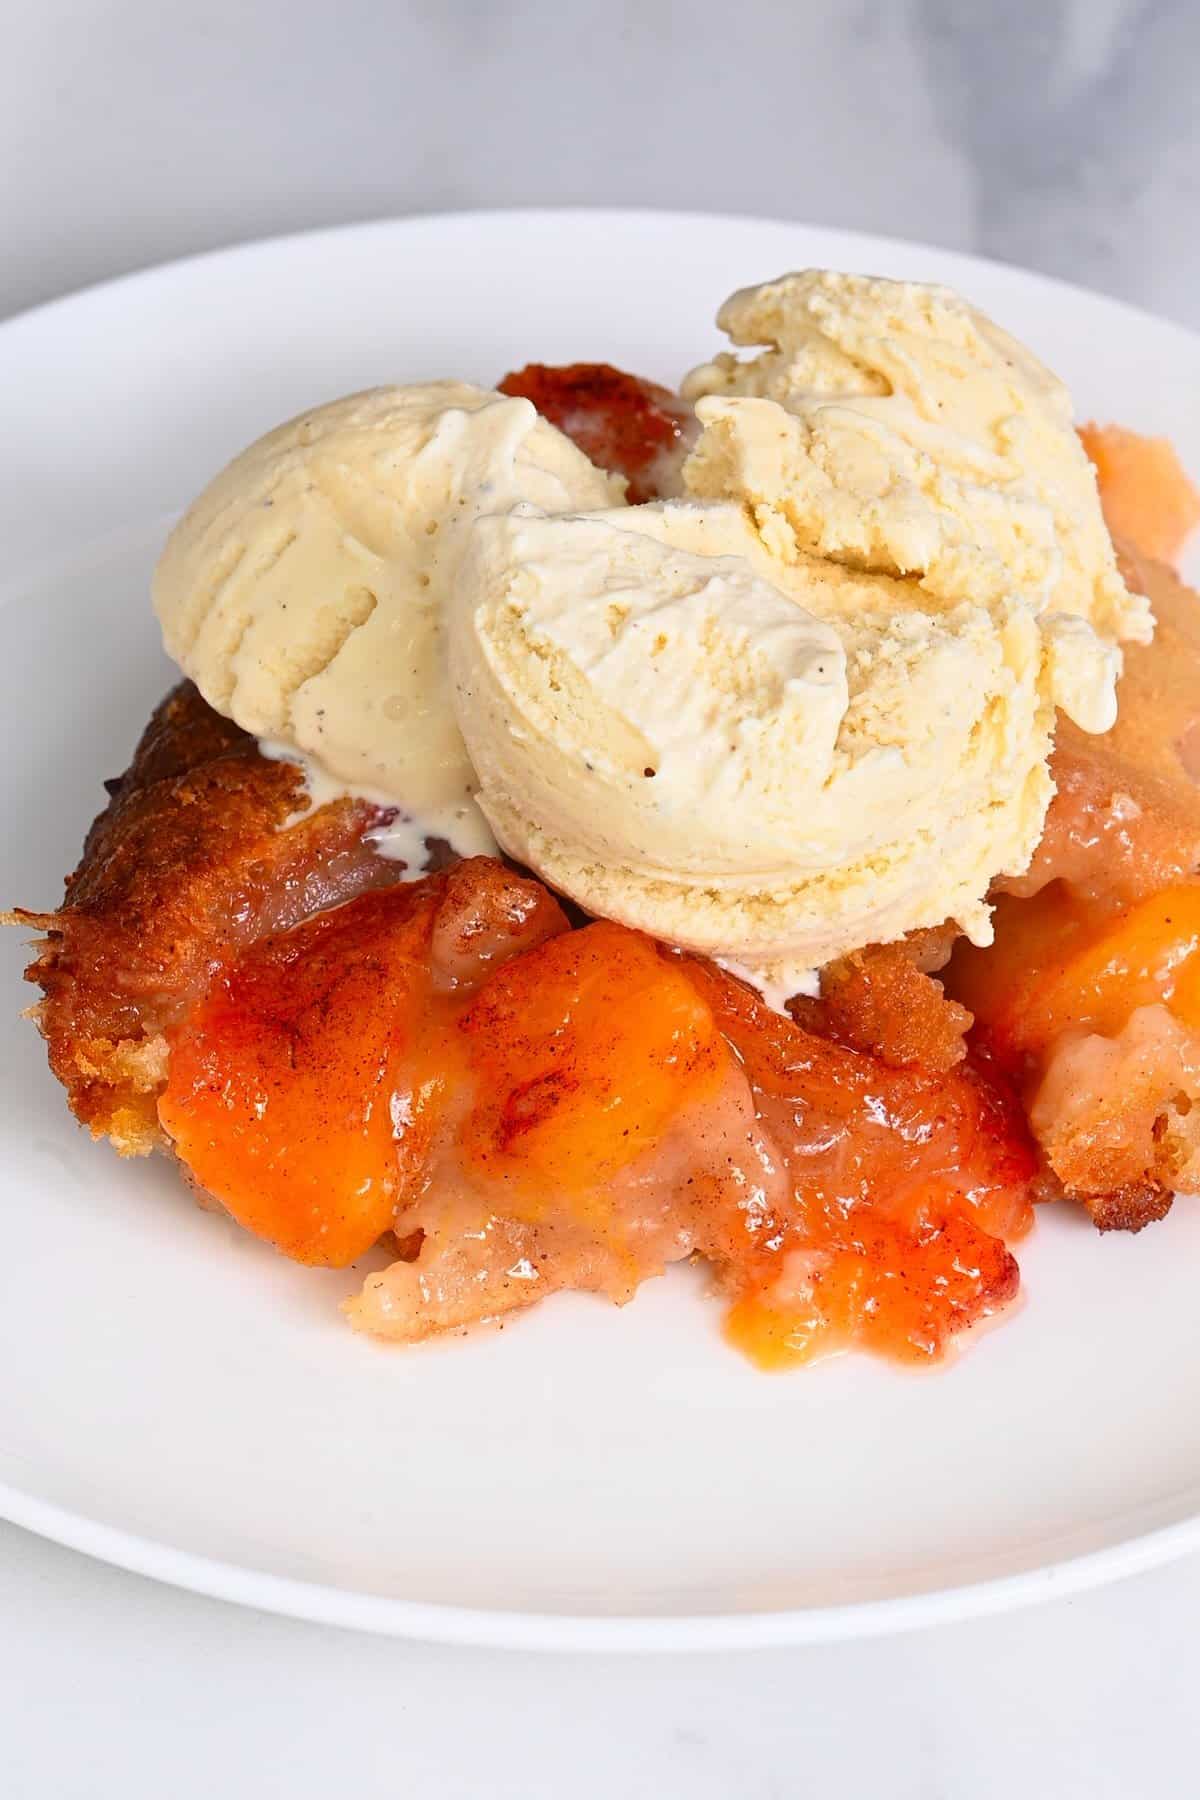 A serving of peach cobbler and ice cream